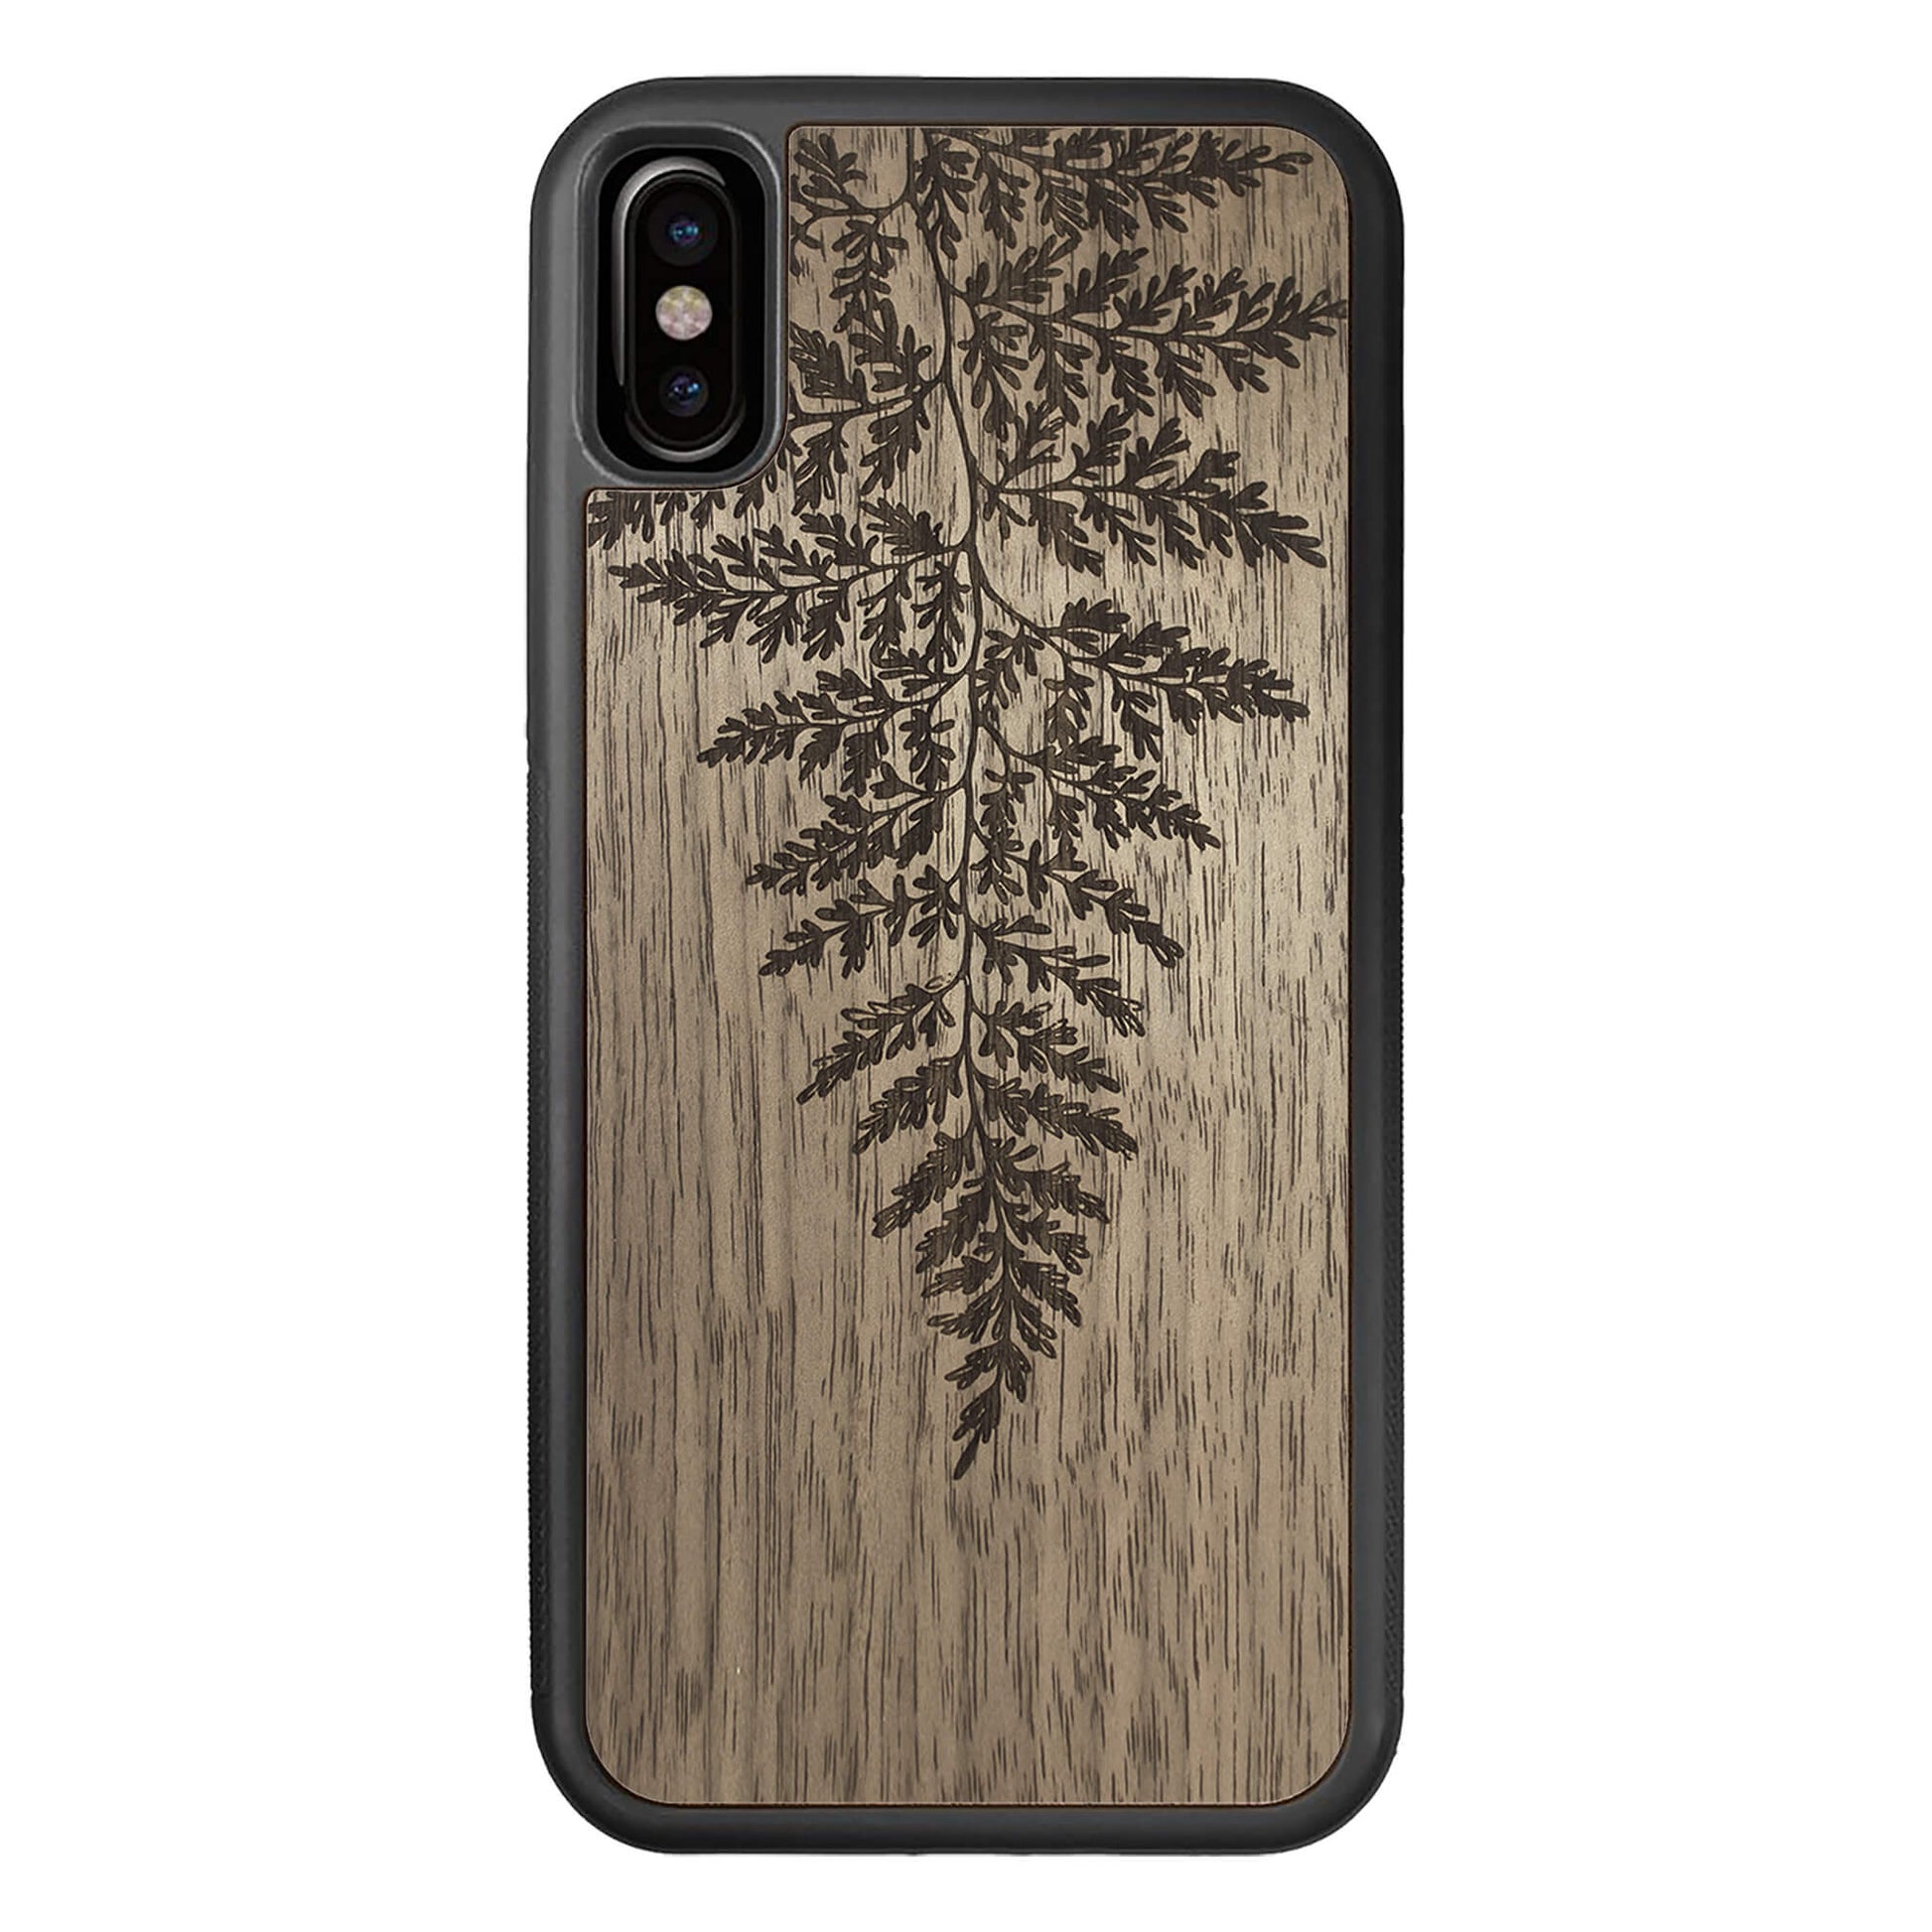 Wooden Case for iPhone XS/X Fern